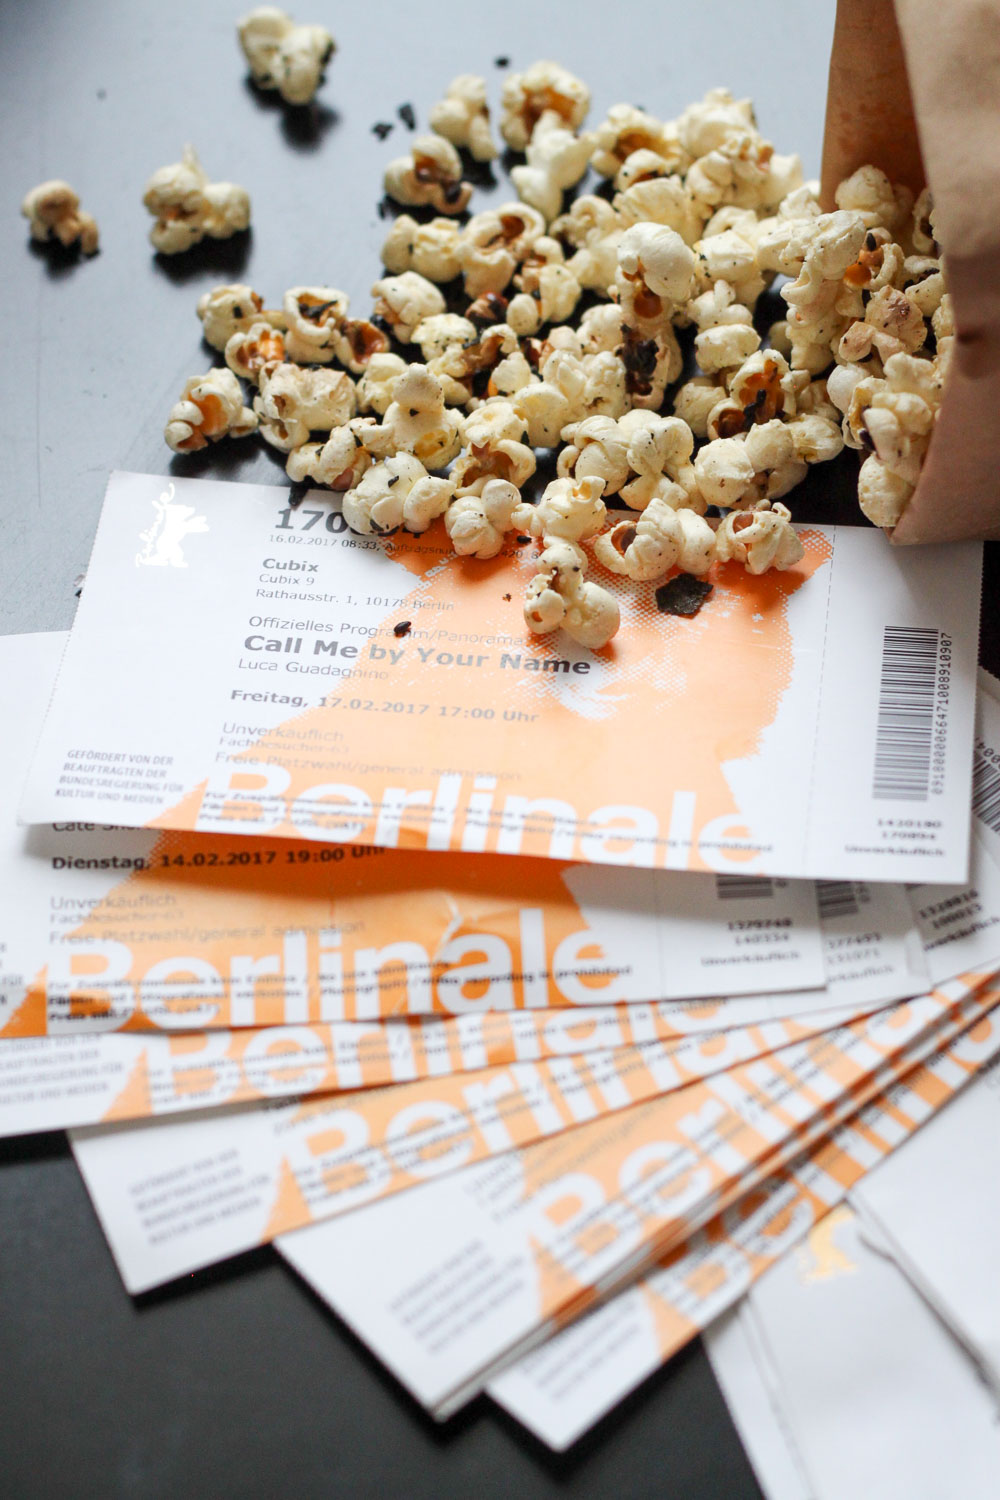 Berlinale tickets and popcorn (Eat Me. Drink Me.)